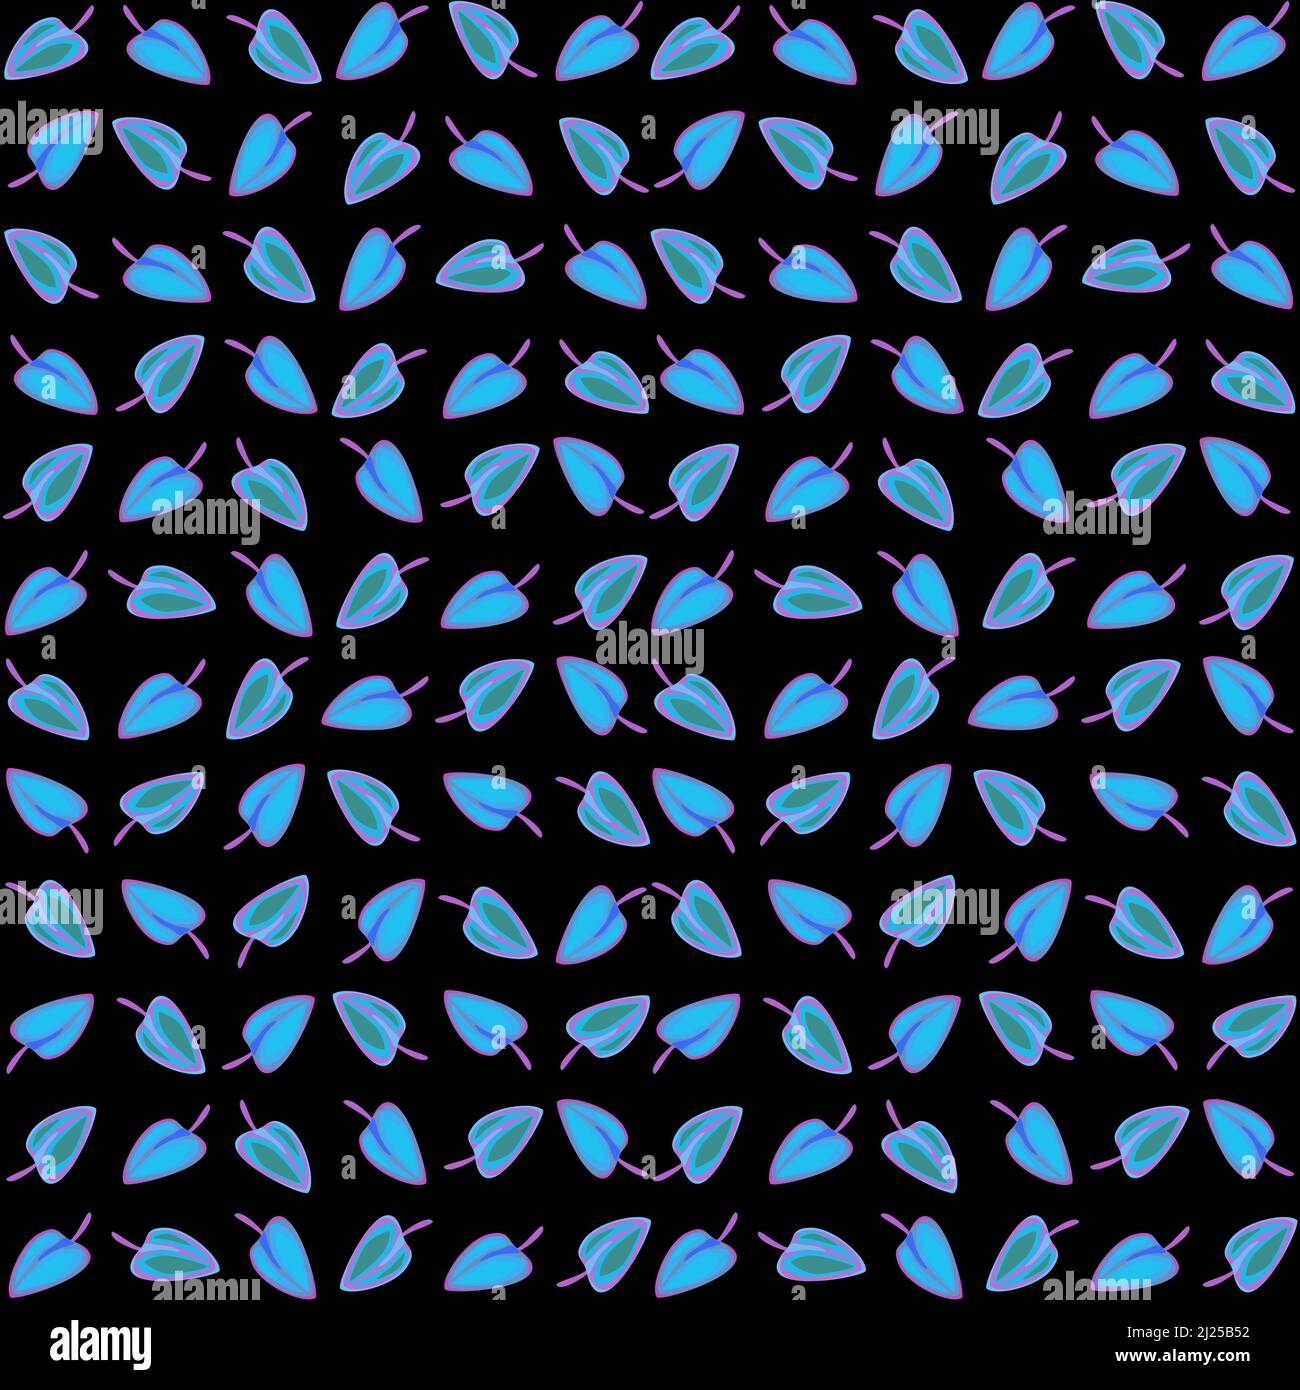 Colorful Blue Leaf Wallpaper Pattern Background Stock Vector